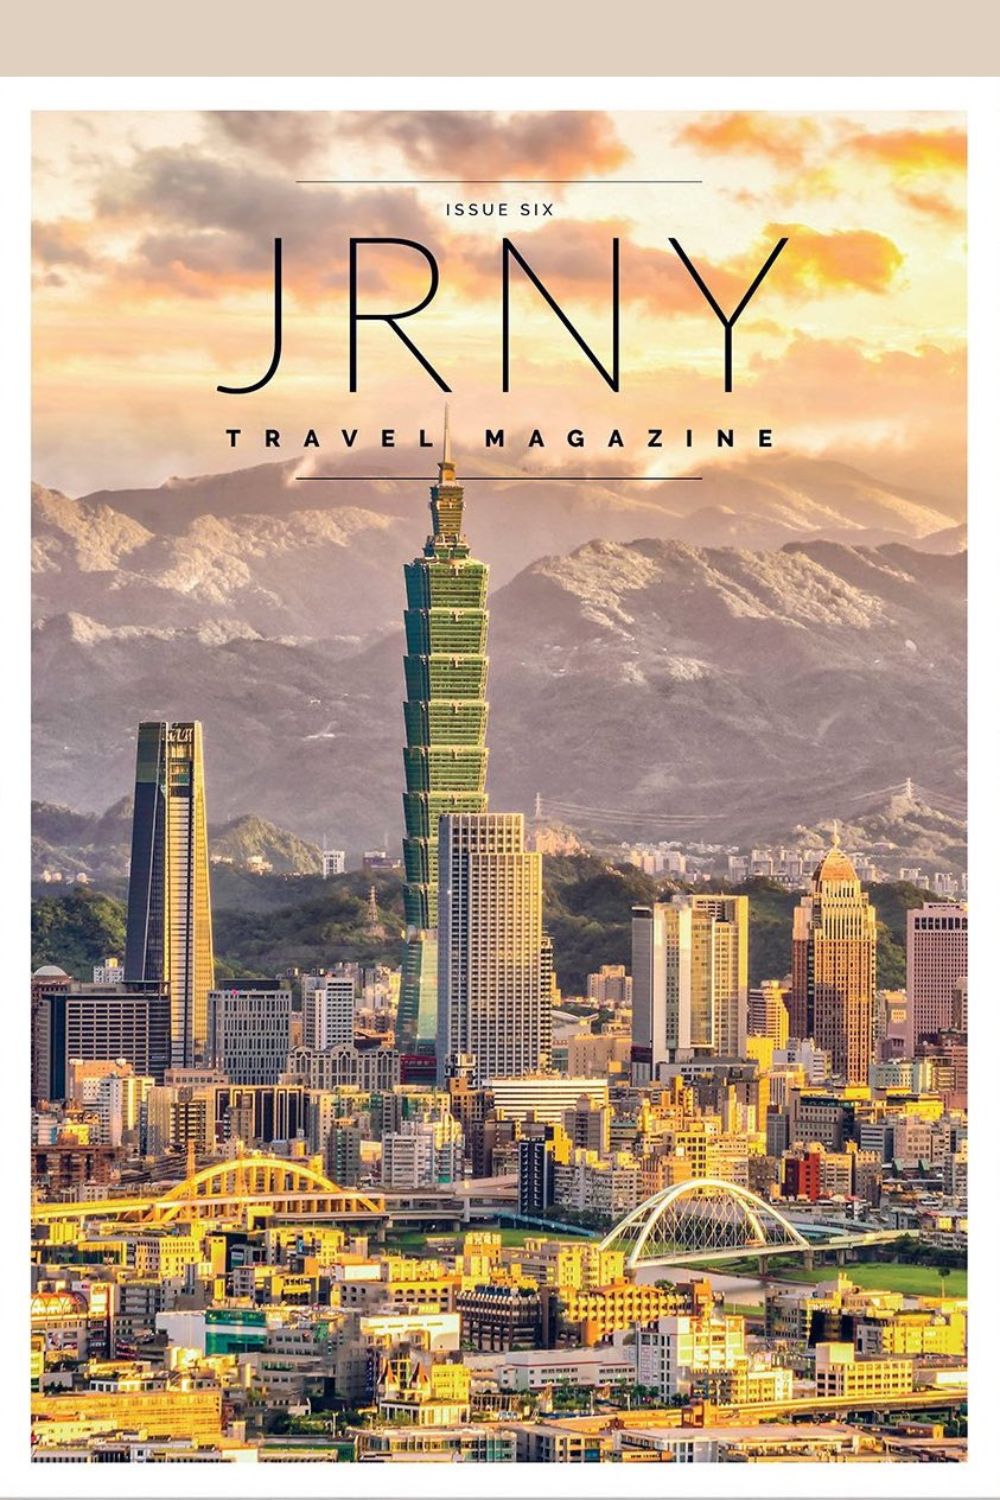 JRNY magazine cover - Issue 6